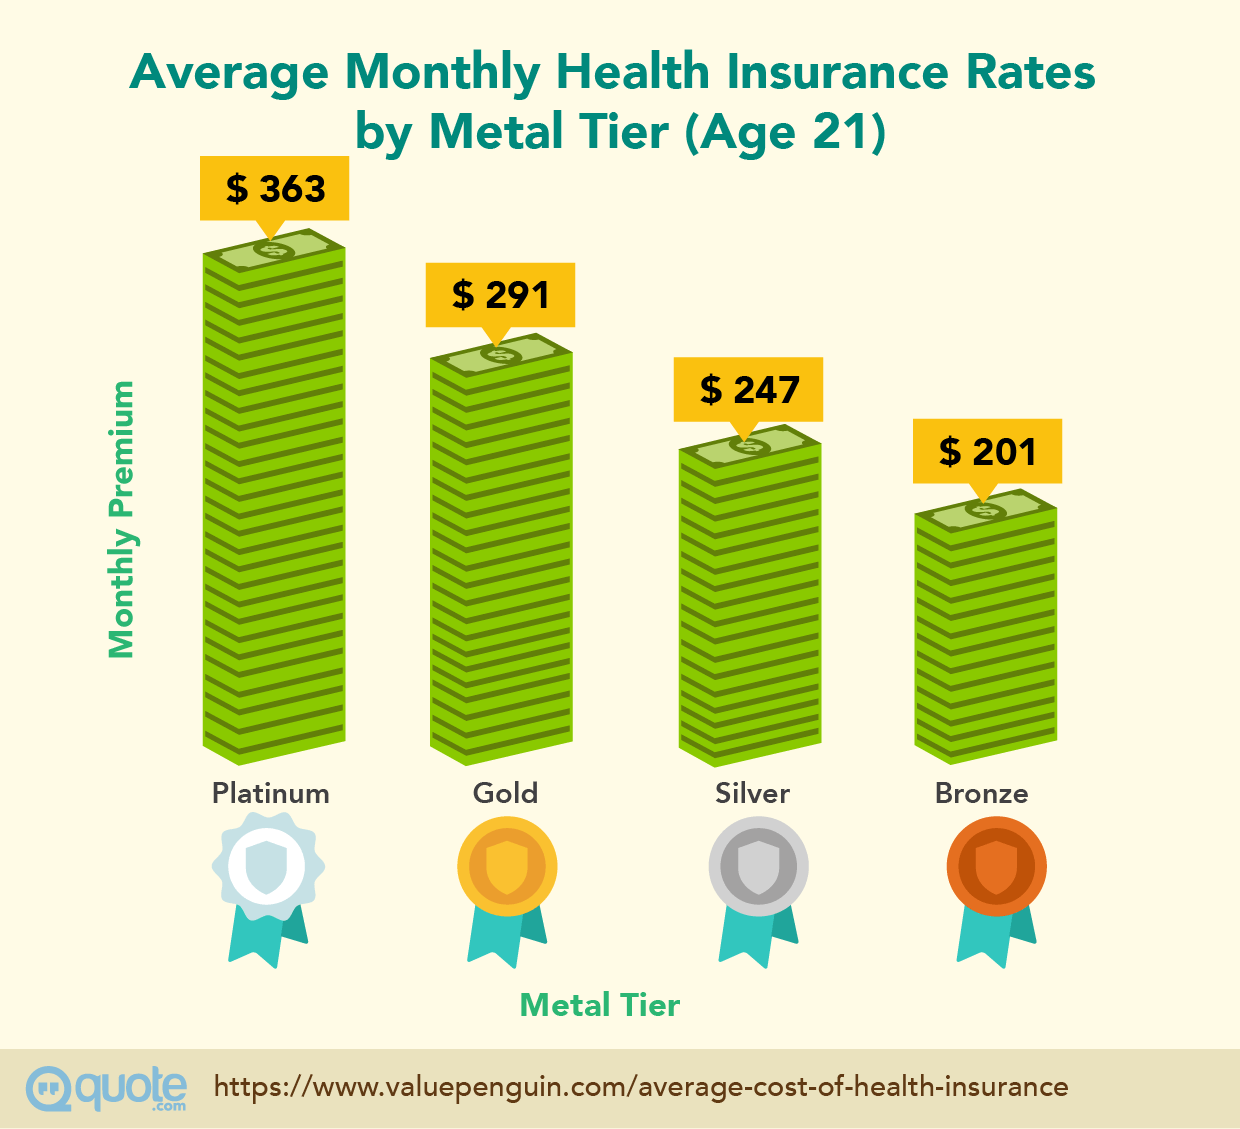 Average Monthly Health Insurance Rates by Metal Tier